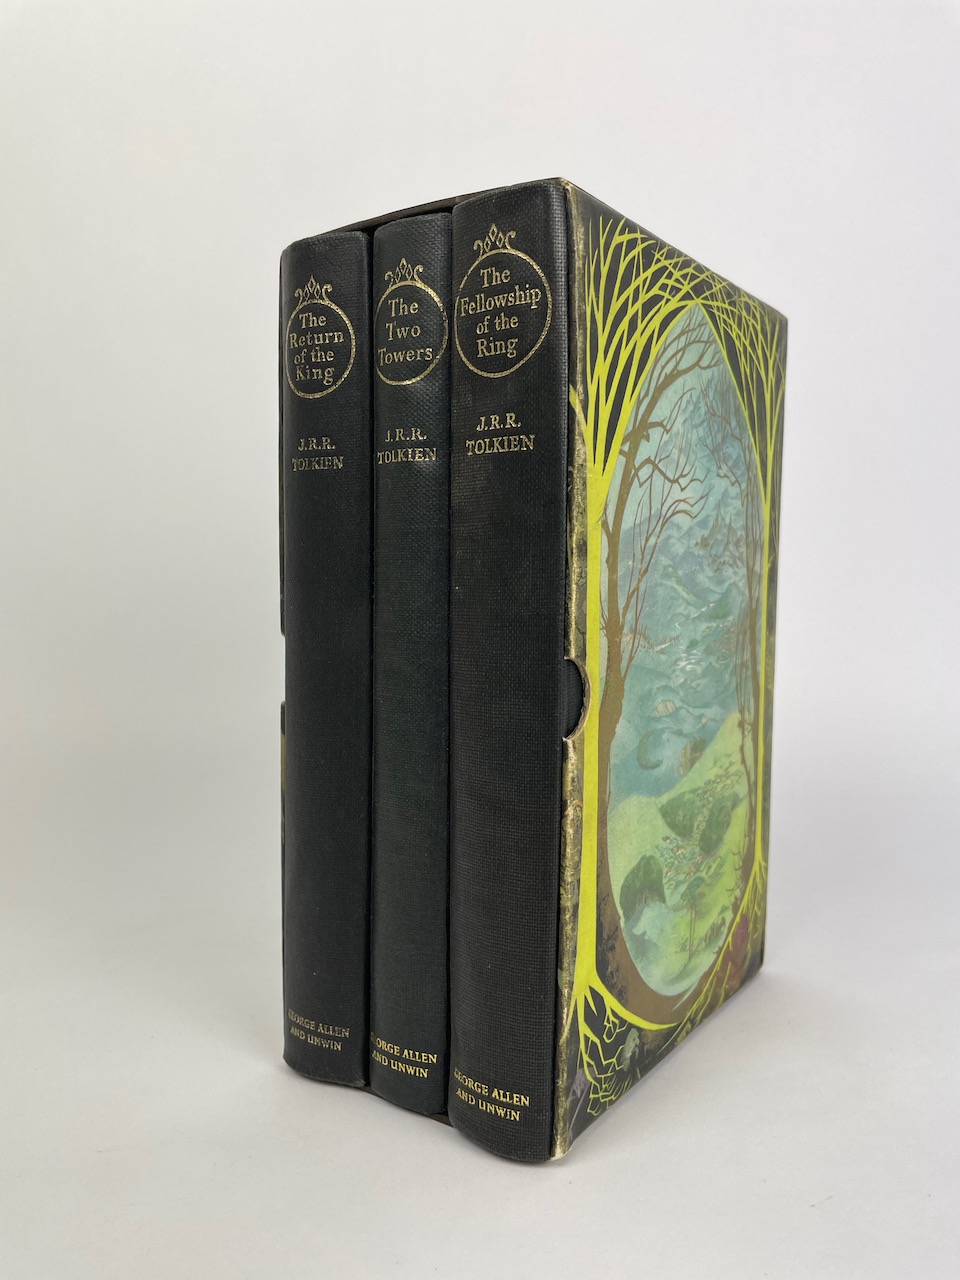 The true 1st Deluxe Edition of the Lord of the Rings, housed in the very scarce original publishers slipcase featuring the Pauline Baynes color triptych artwor